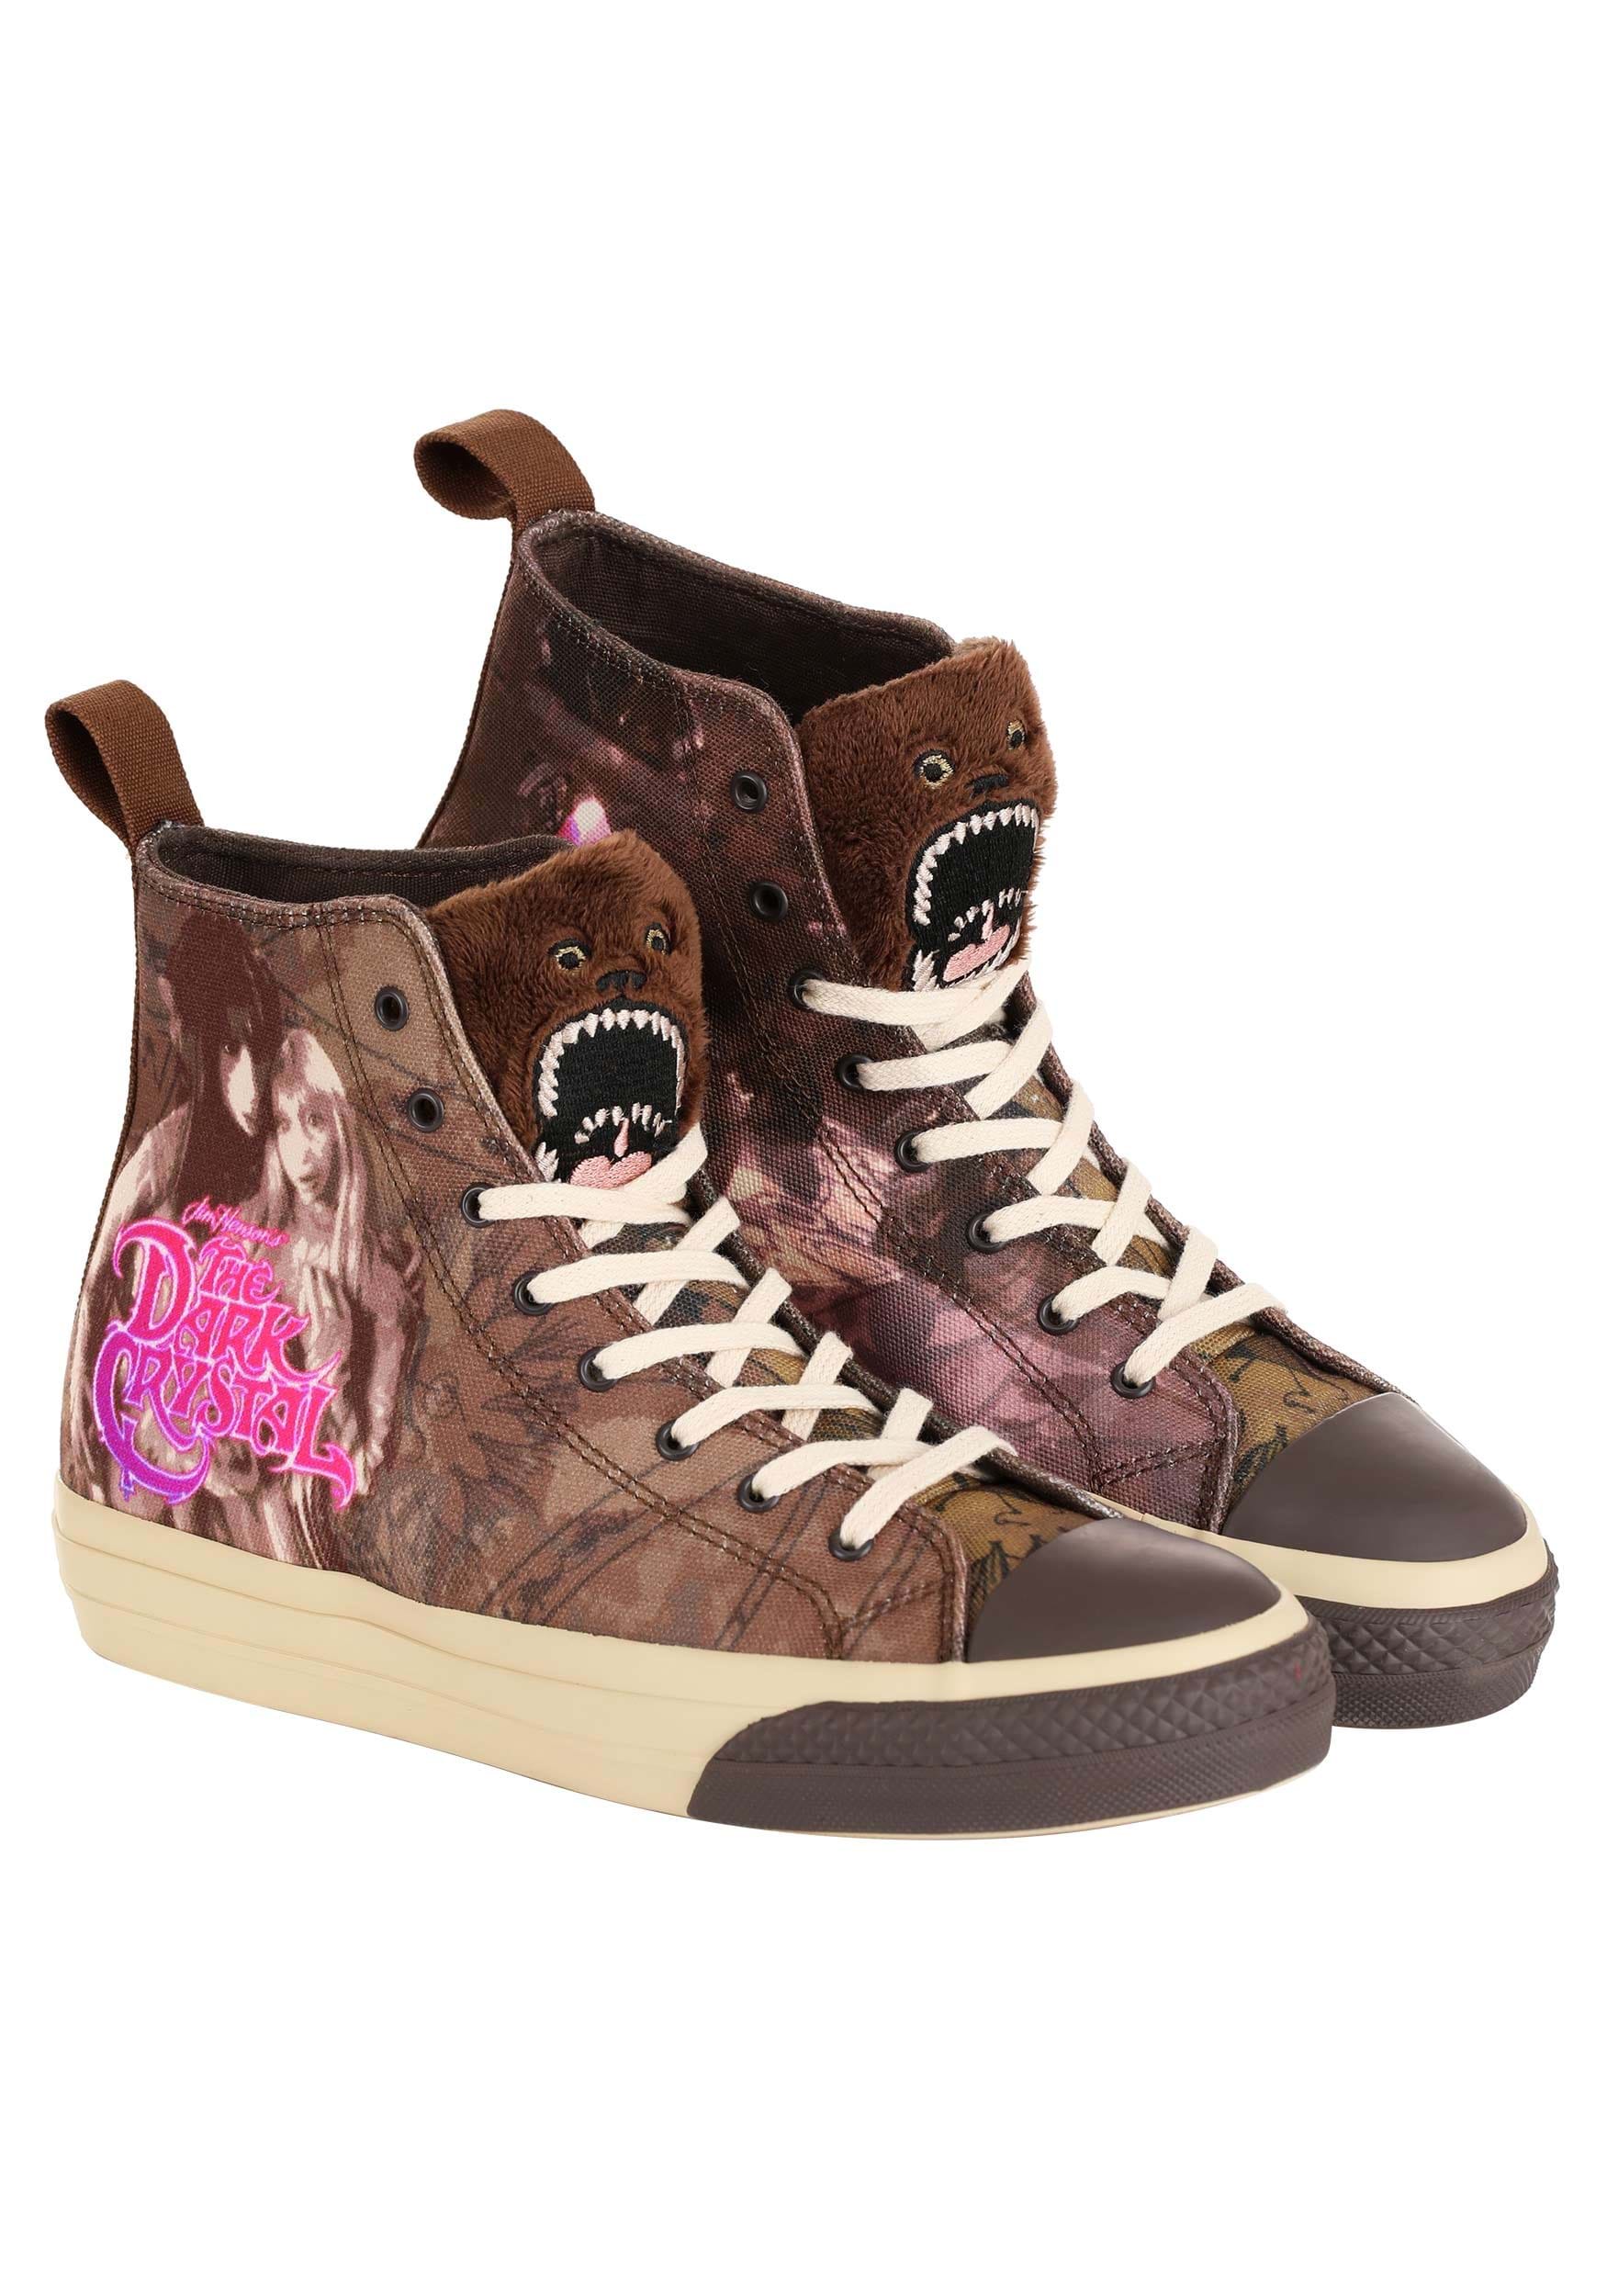 Fizzgig and Skeksis The Dark Crystal High Top Shoes